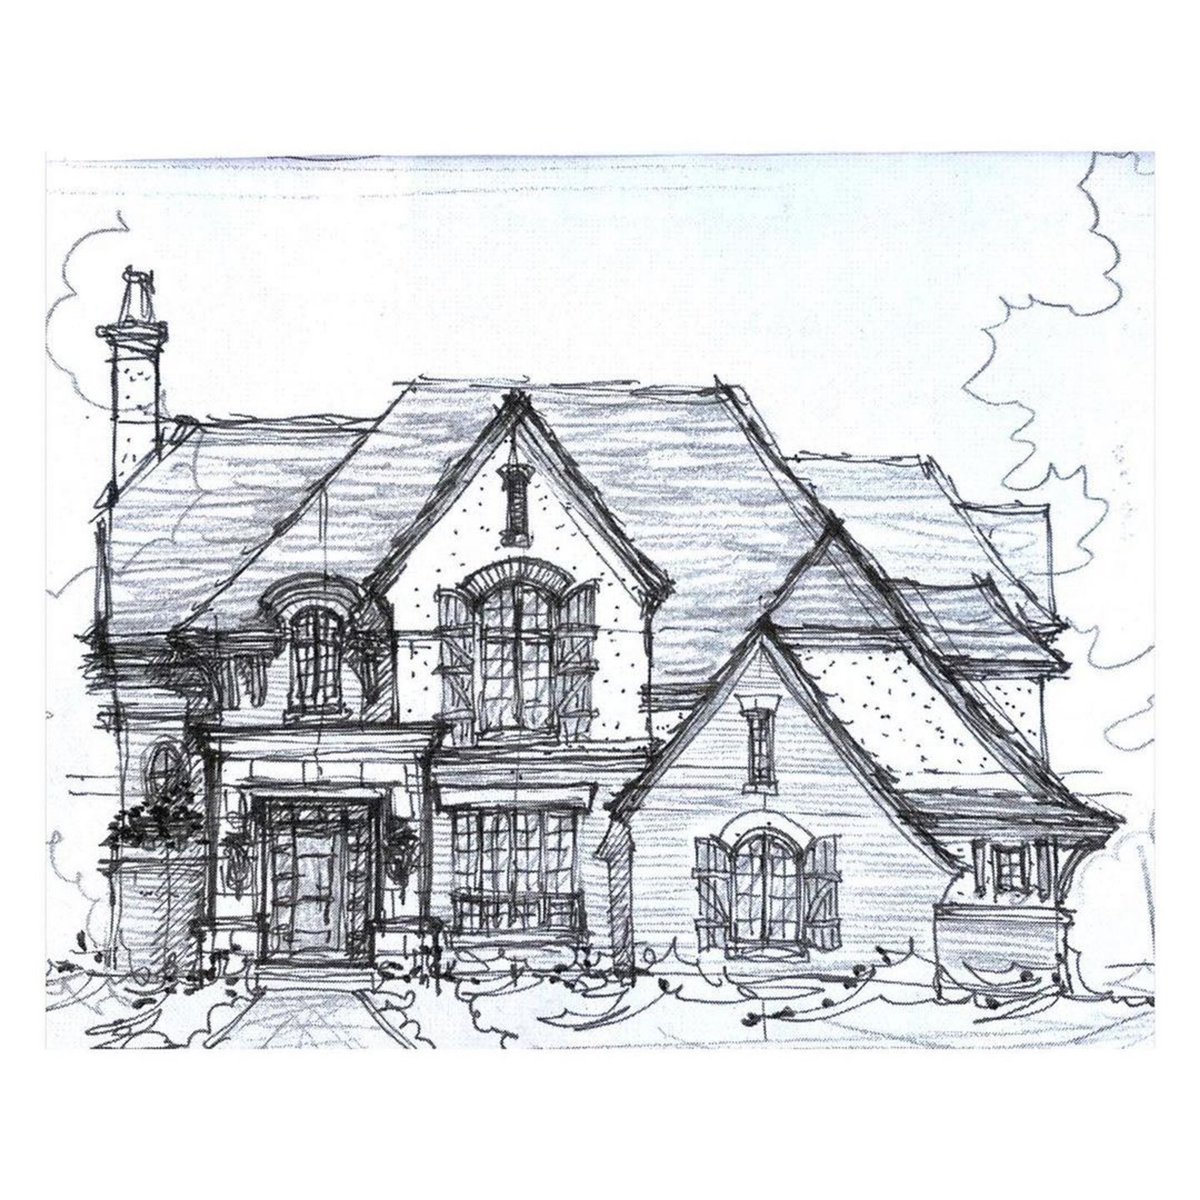 In this elevation study we envision stone and natural materials. Earthy colors will create harmony with the landscape.

#Elevation #Architecture #LuxuryHome #CustomHomeBuilder #DesignBuild #JPCraig